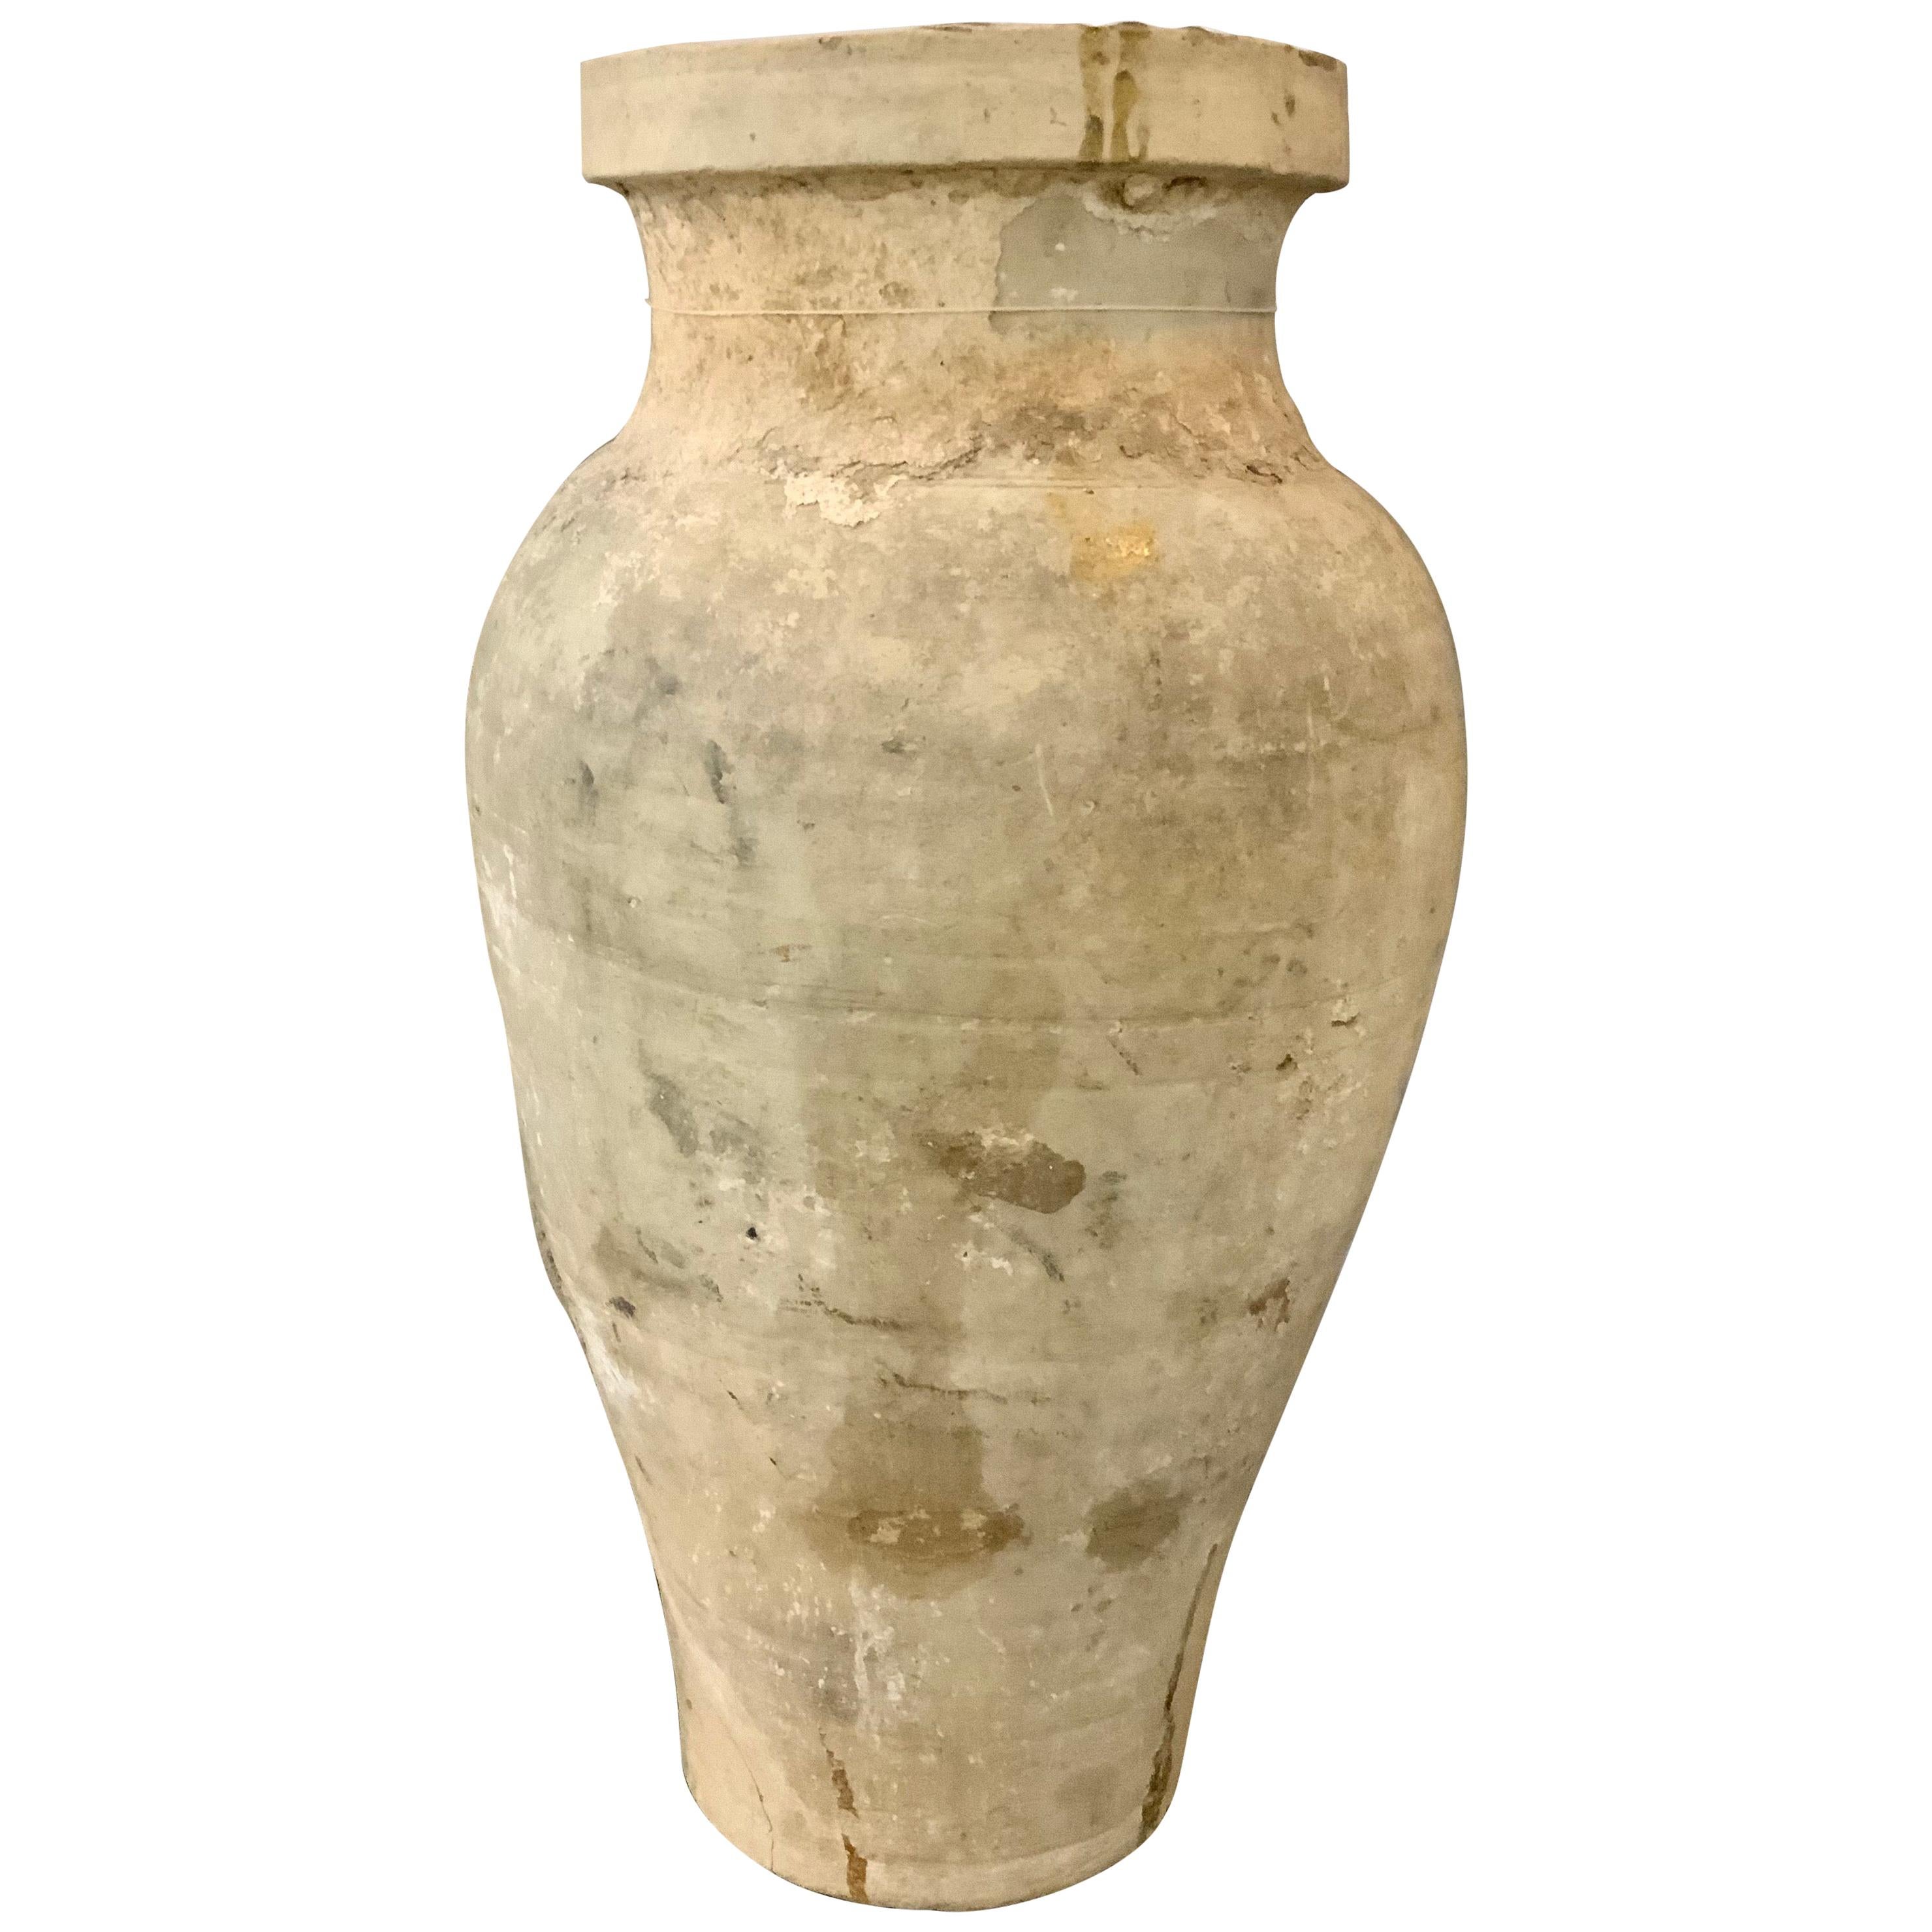 Contemporary Terracotta Urn from Spain